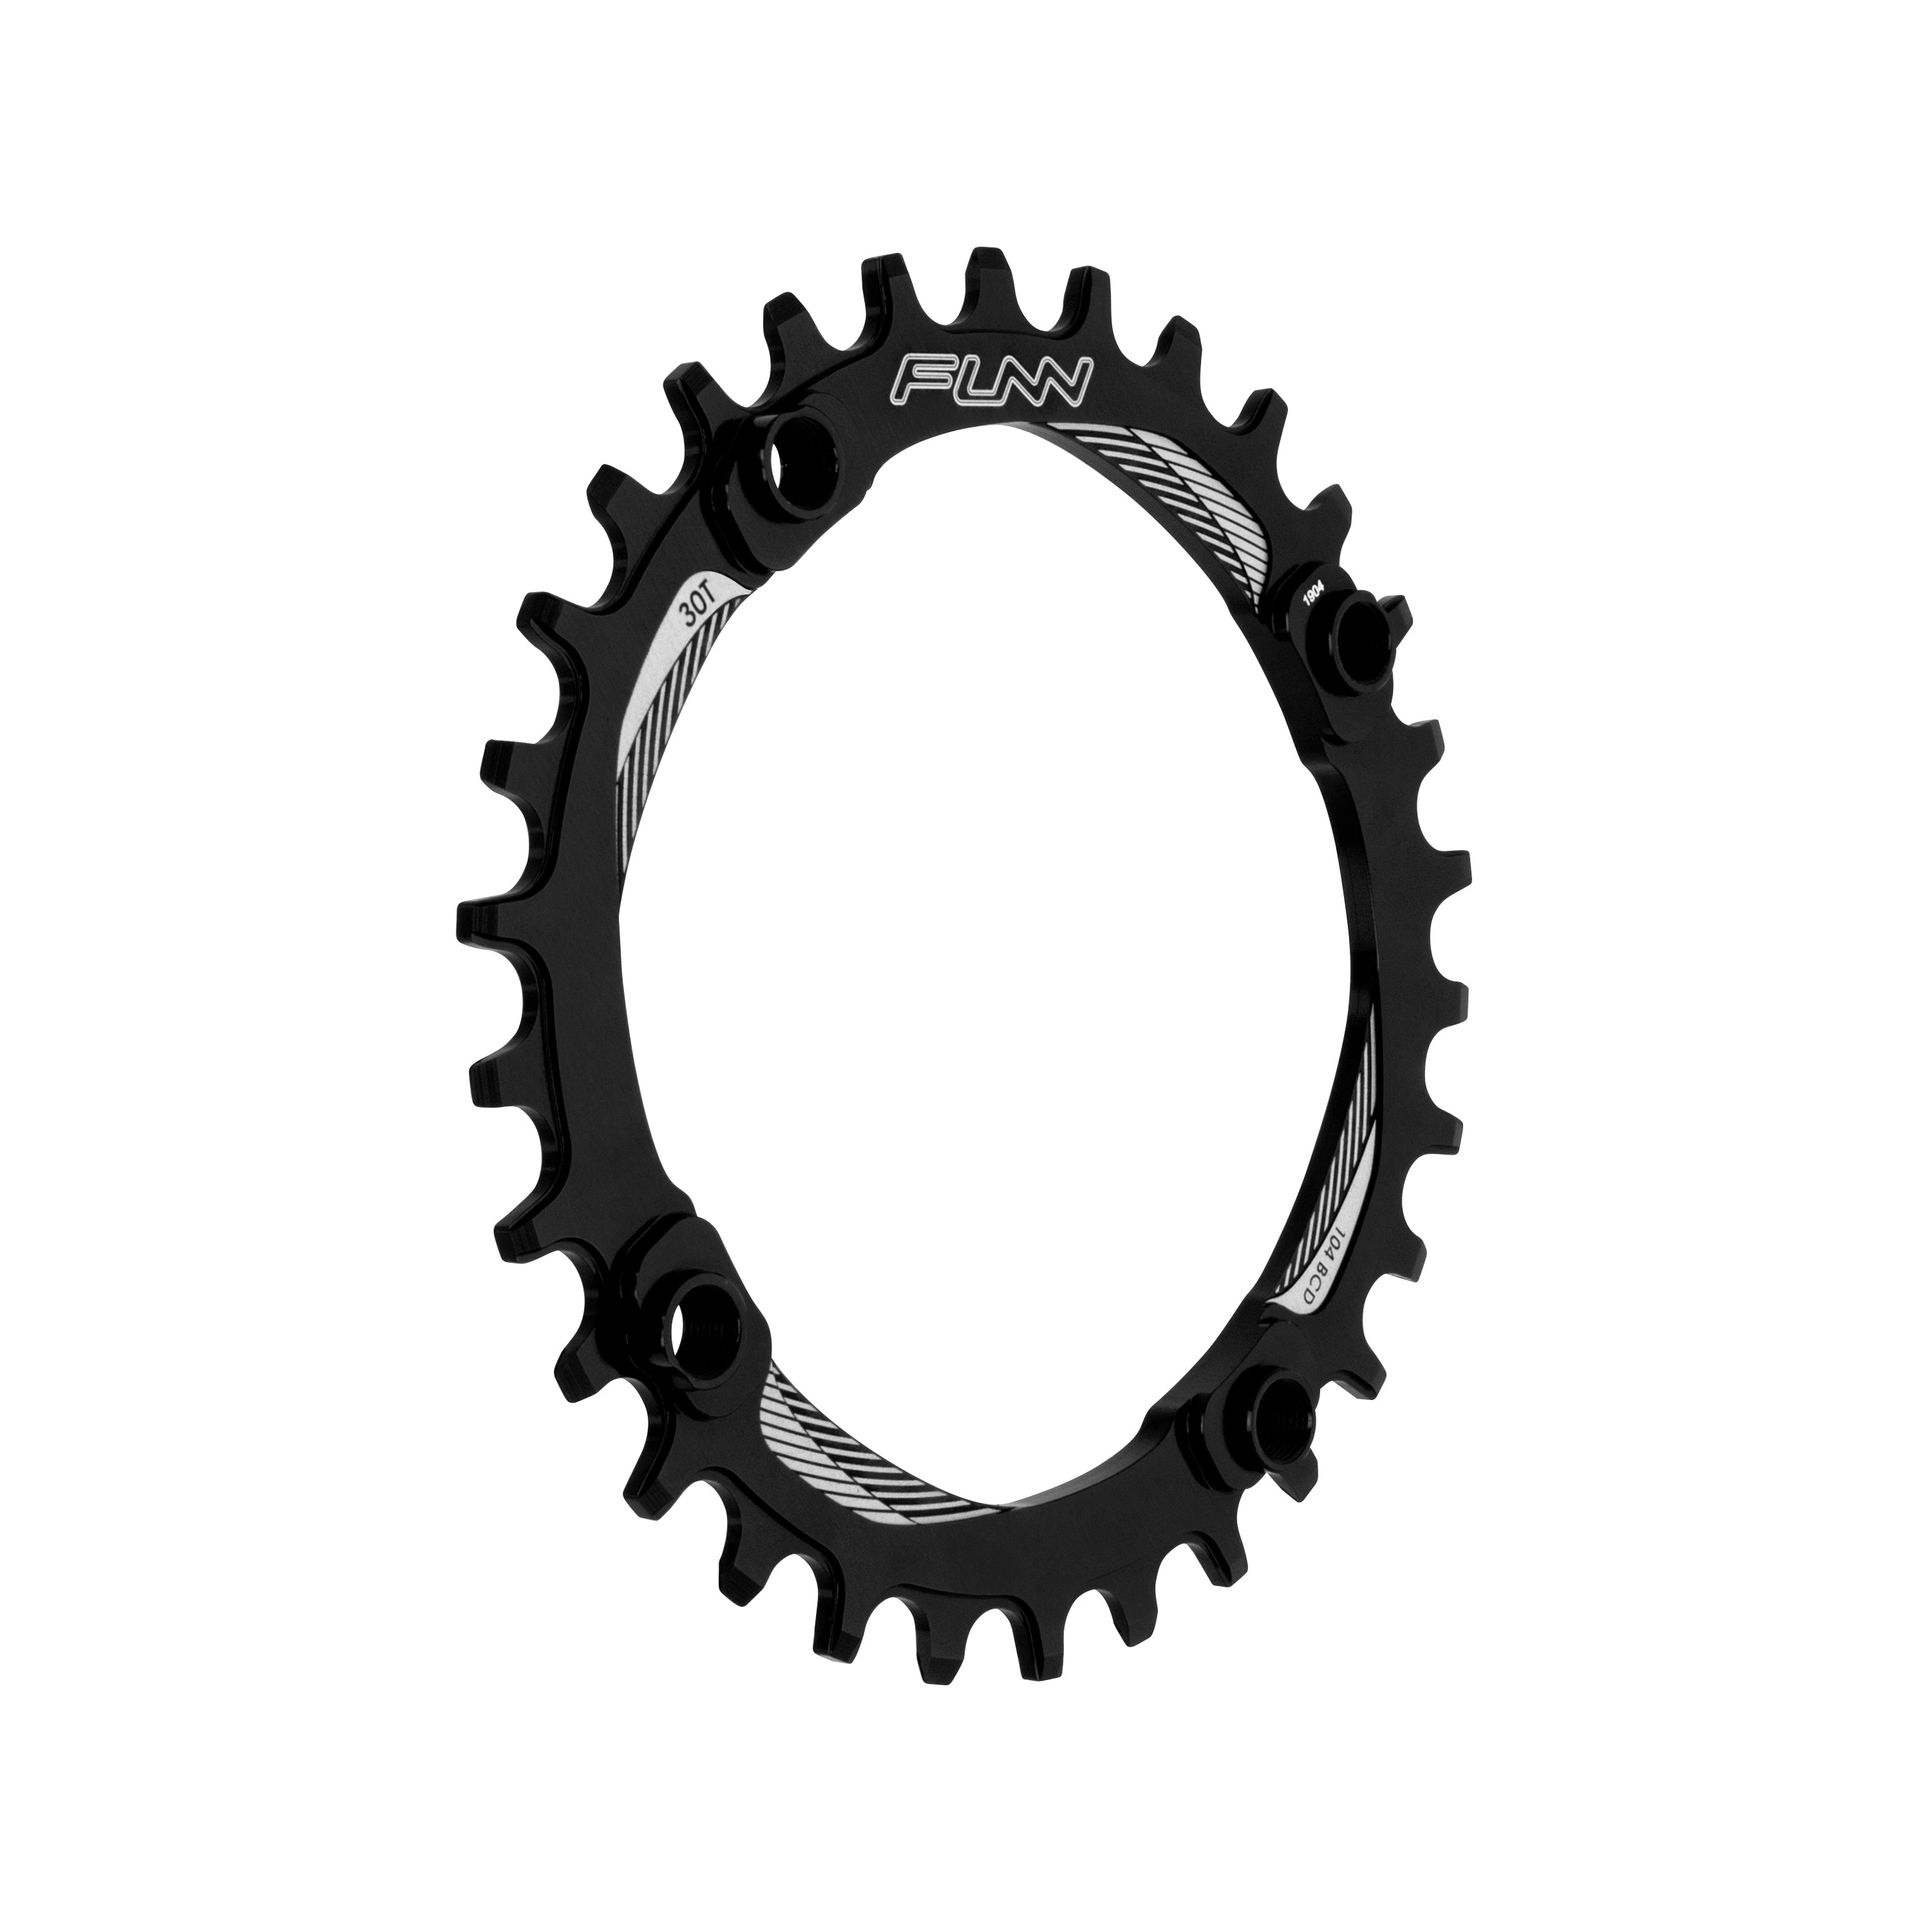 Chainrings - Smith Creek Cycle | West Kelowna, BC